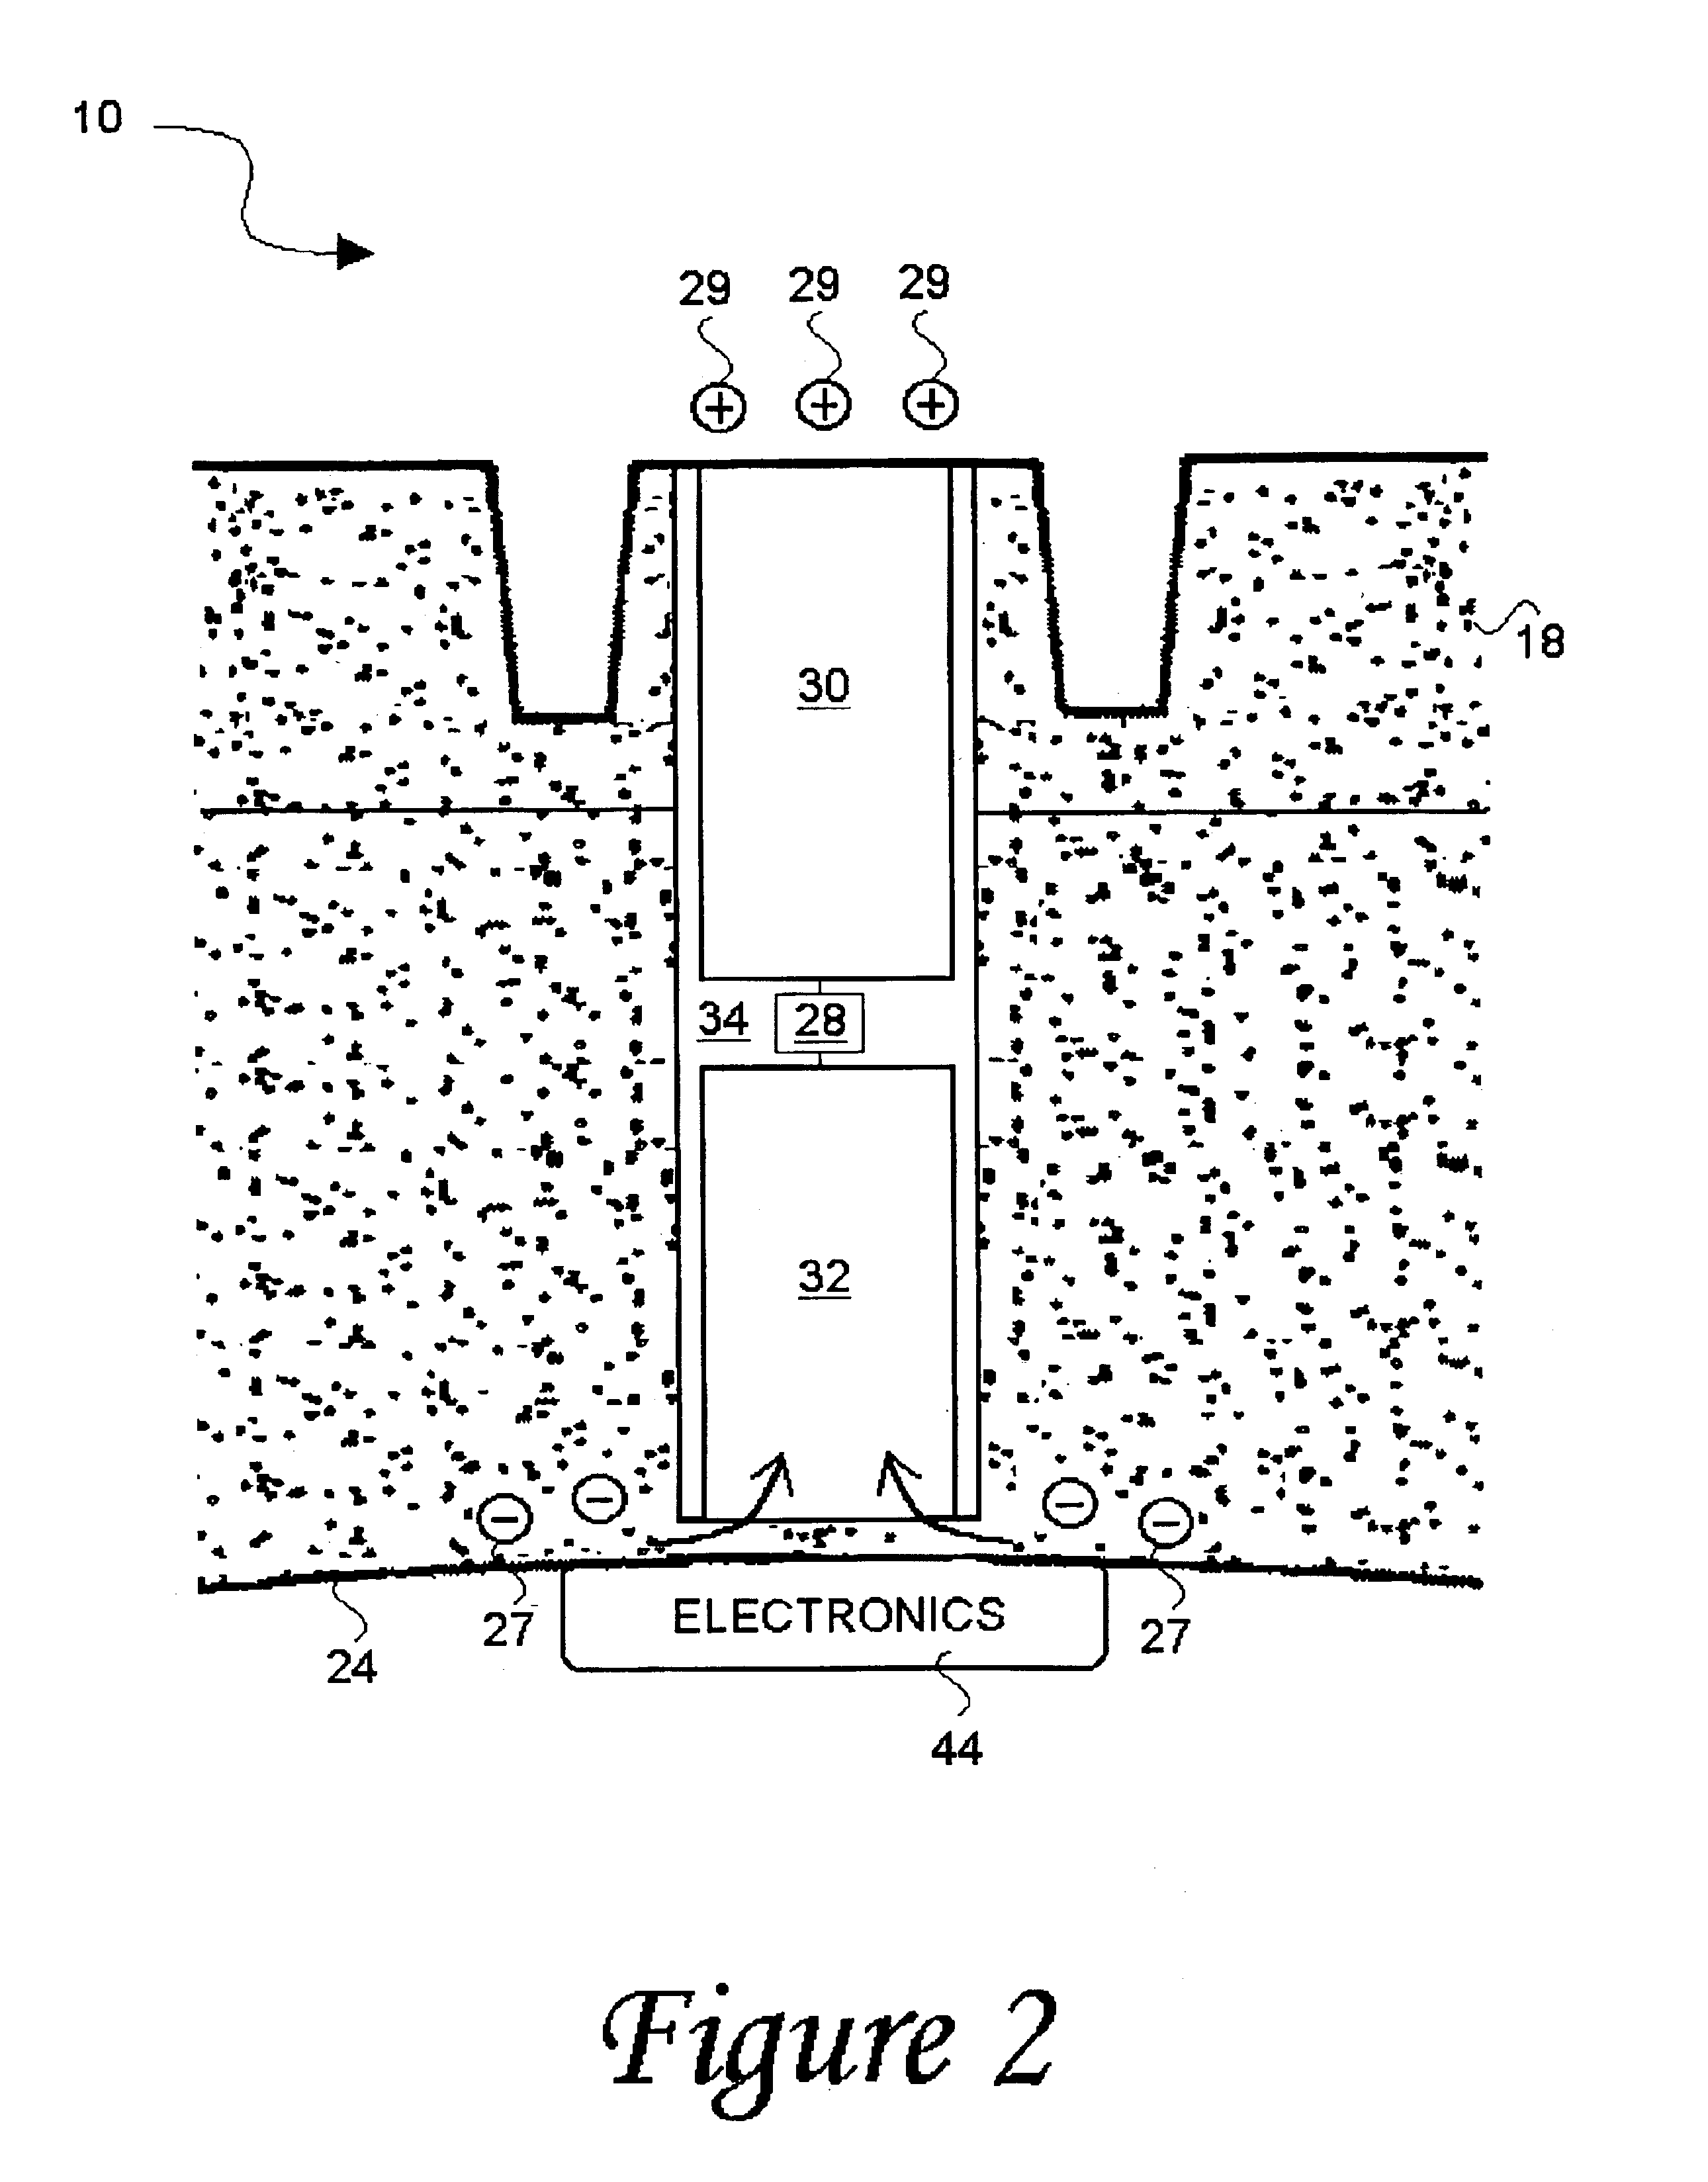 System and method for harvesting electric power from a rotating tire's static electricity